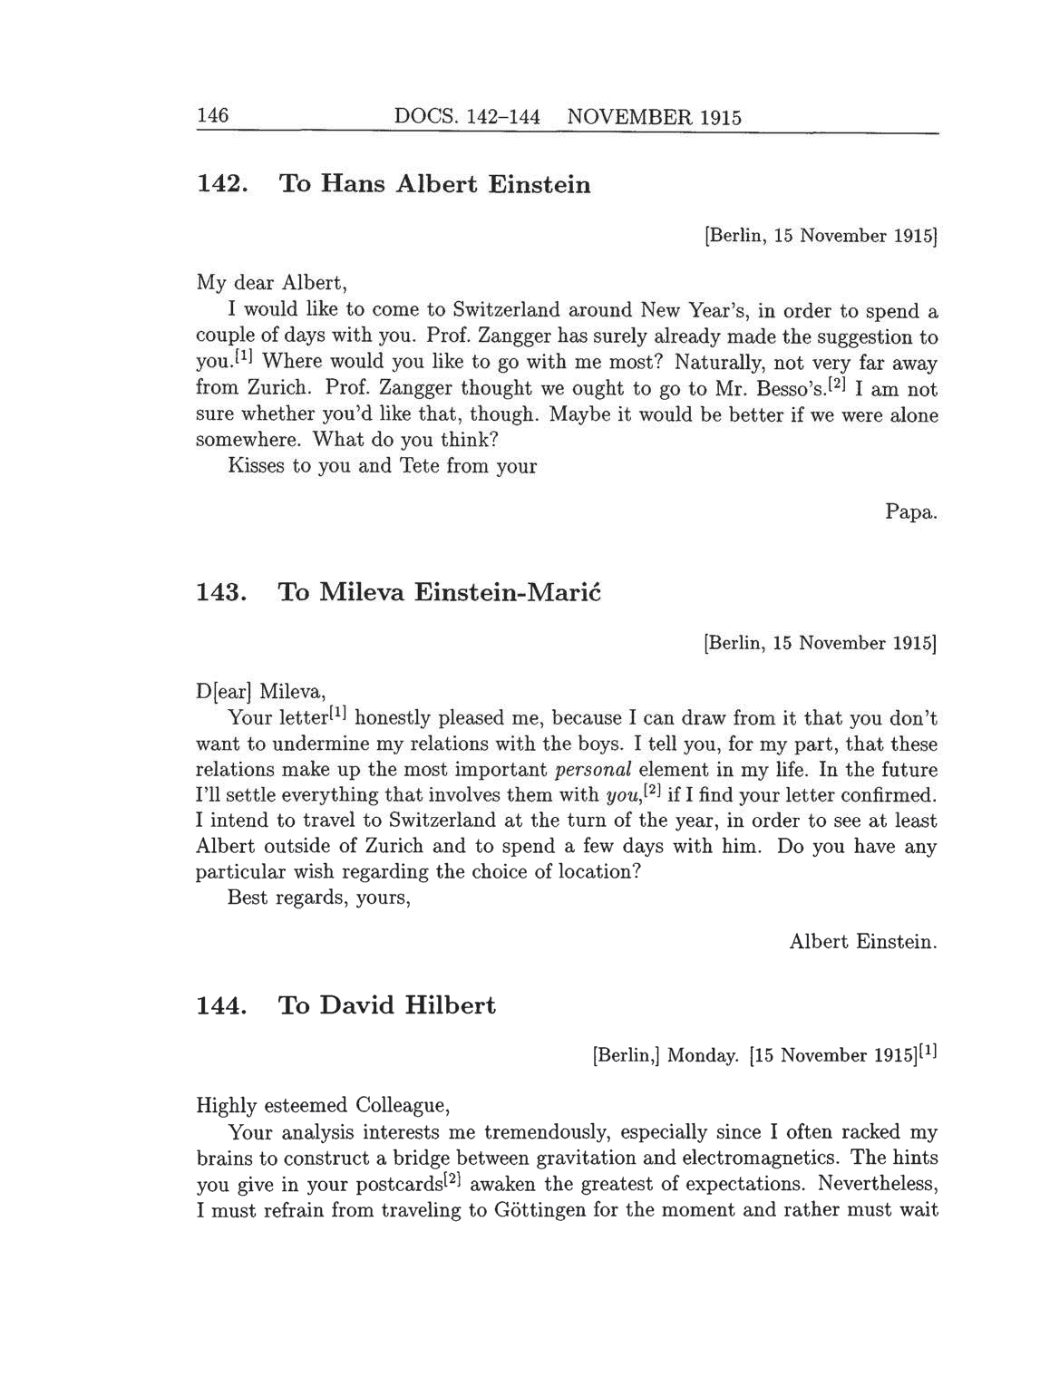 Volume 8: The Berlin Years: Correspondence, 1914-1918 (English translation supplement) page 146